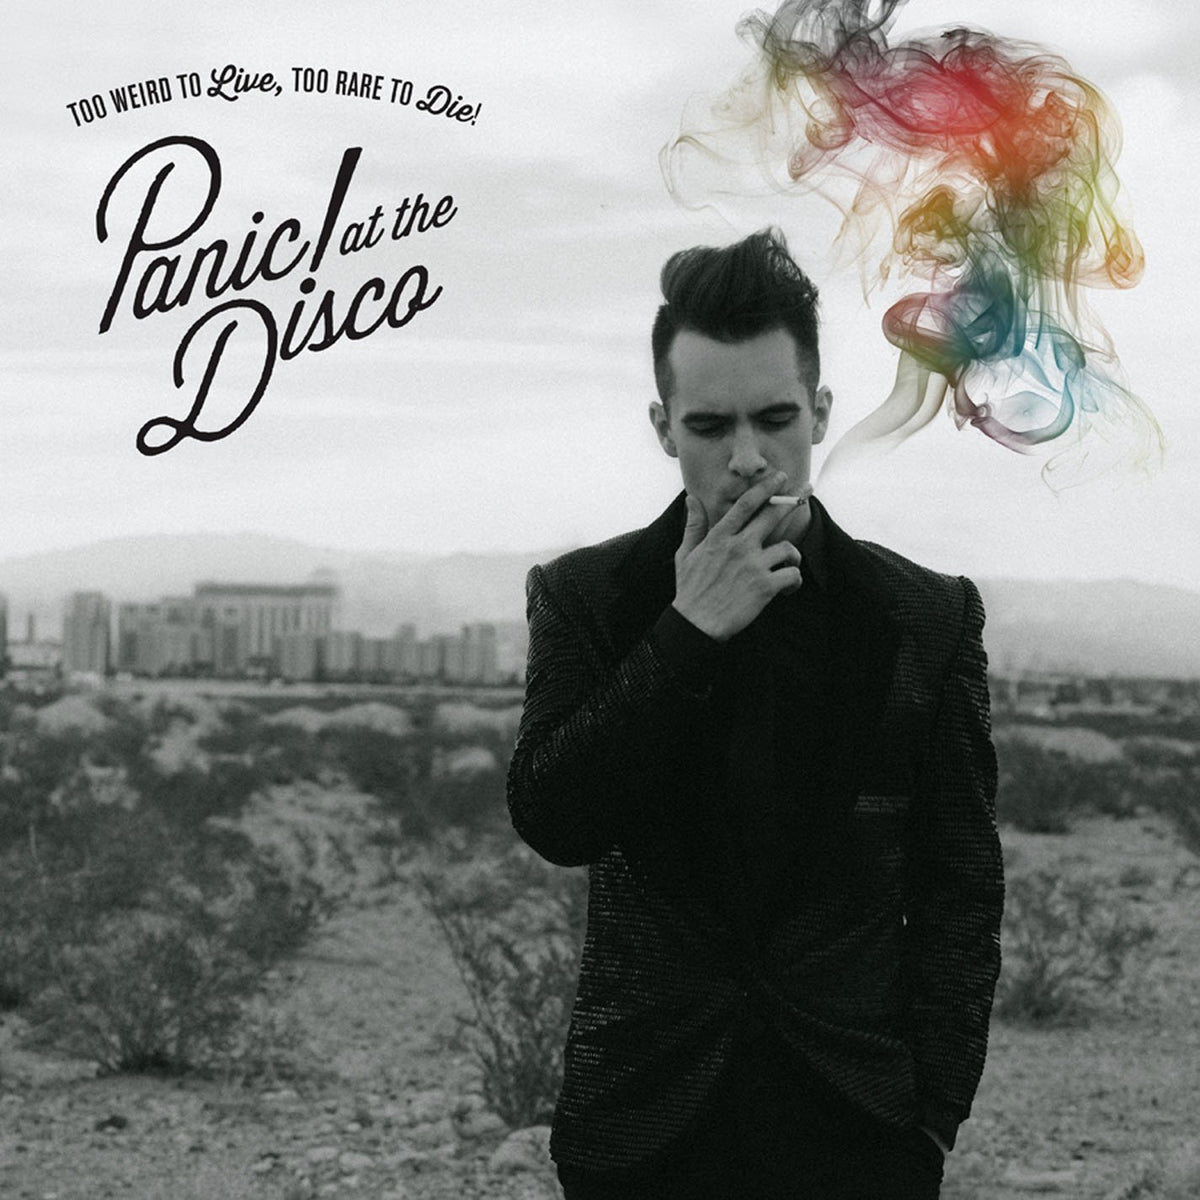 Panic! At The Disco - Too Weird To Live Too Rare To Die LP (Download)